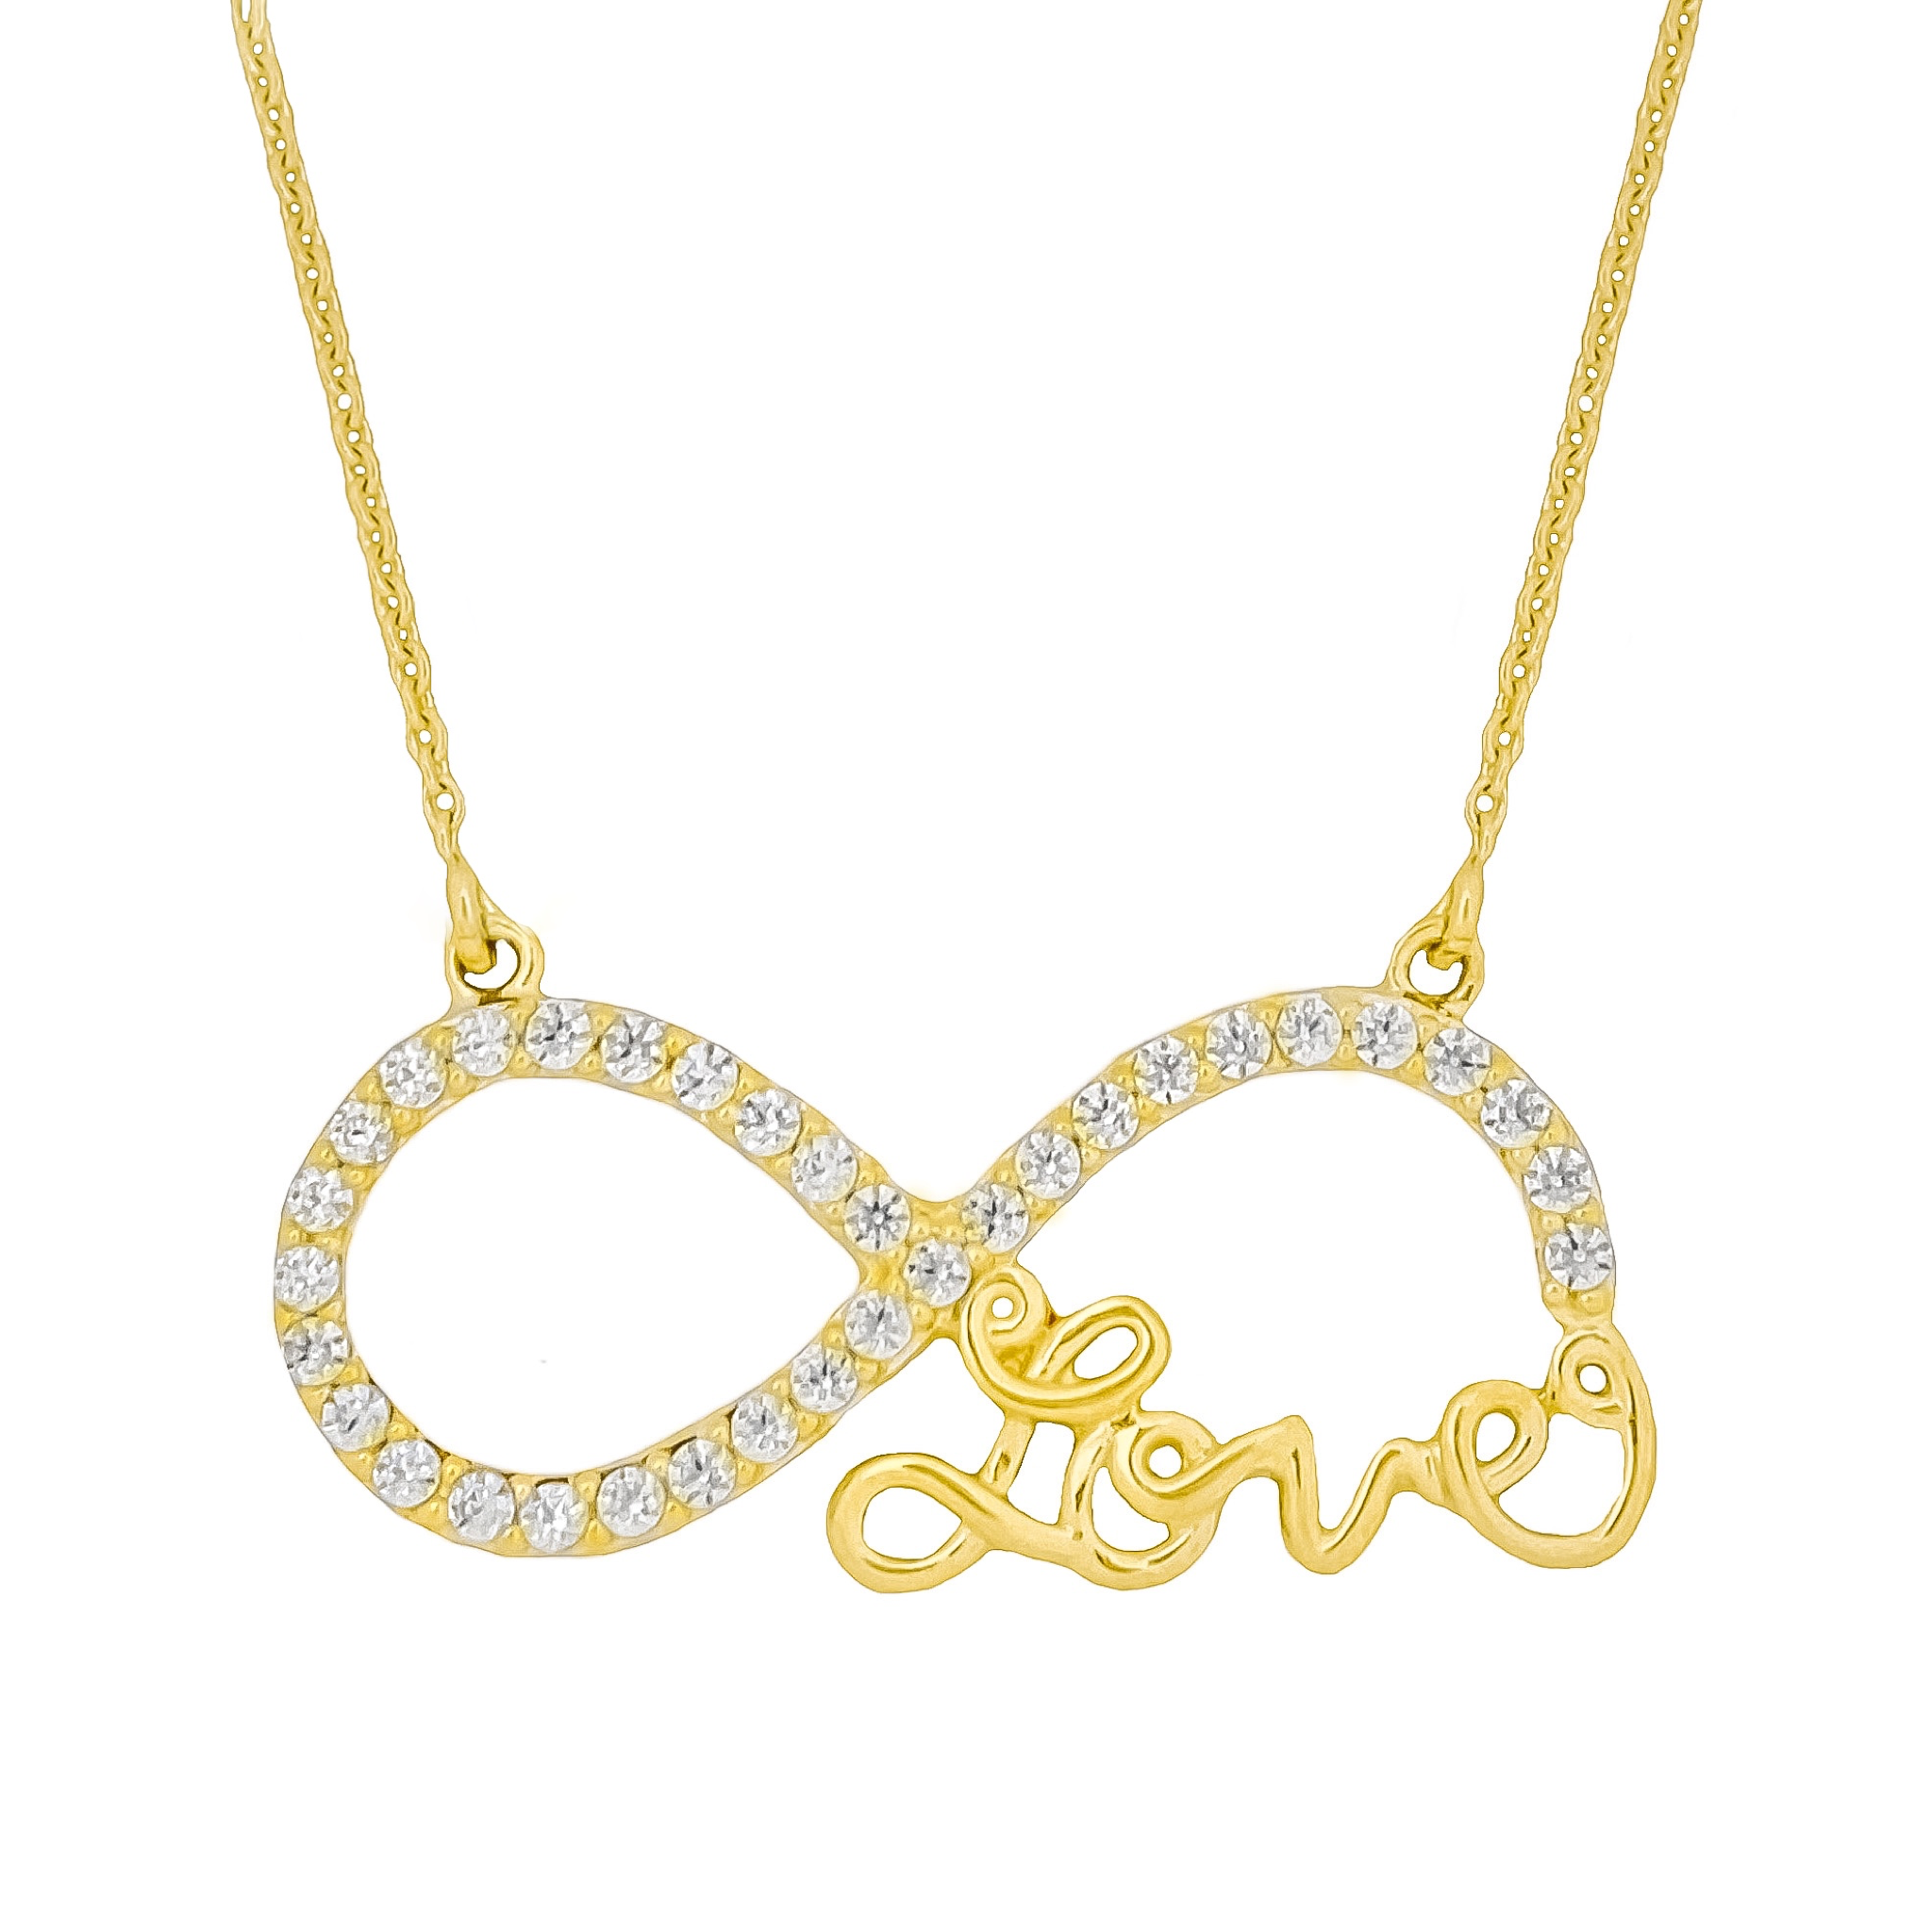 14K YELLOW GOLD CZ LOVE TO INFINITY NECKLACE